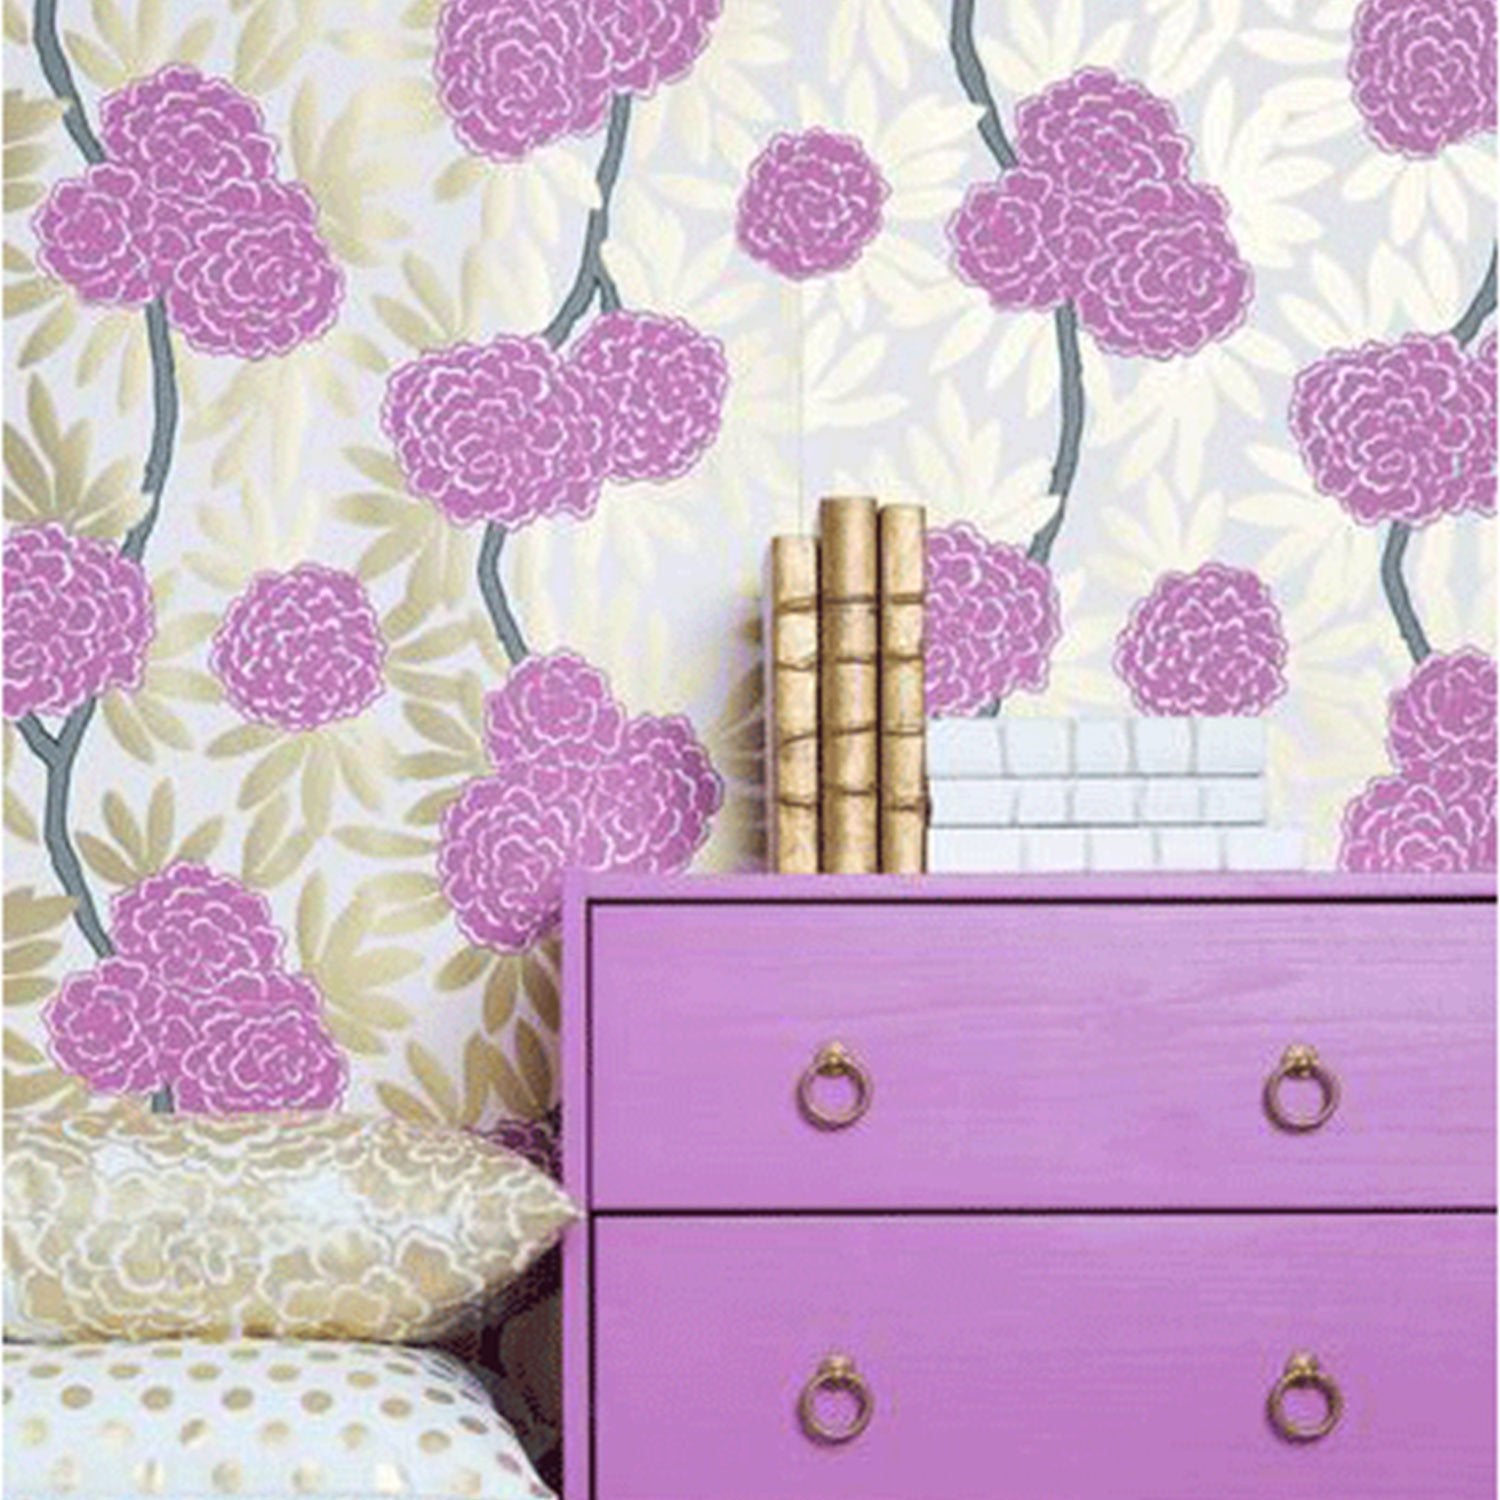 Gold Fleur Chinoise Berry on Blush Wallpaper in Room